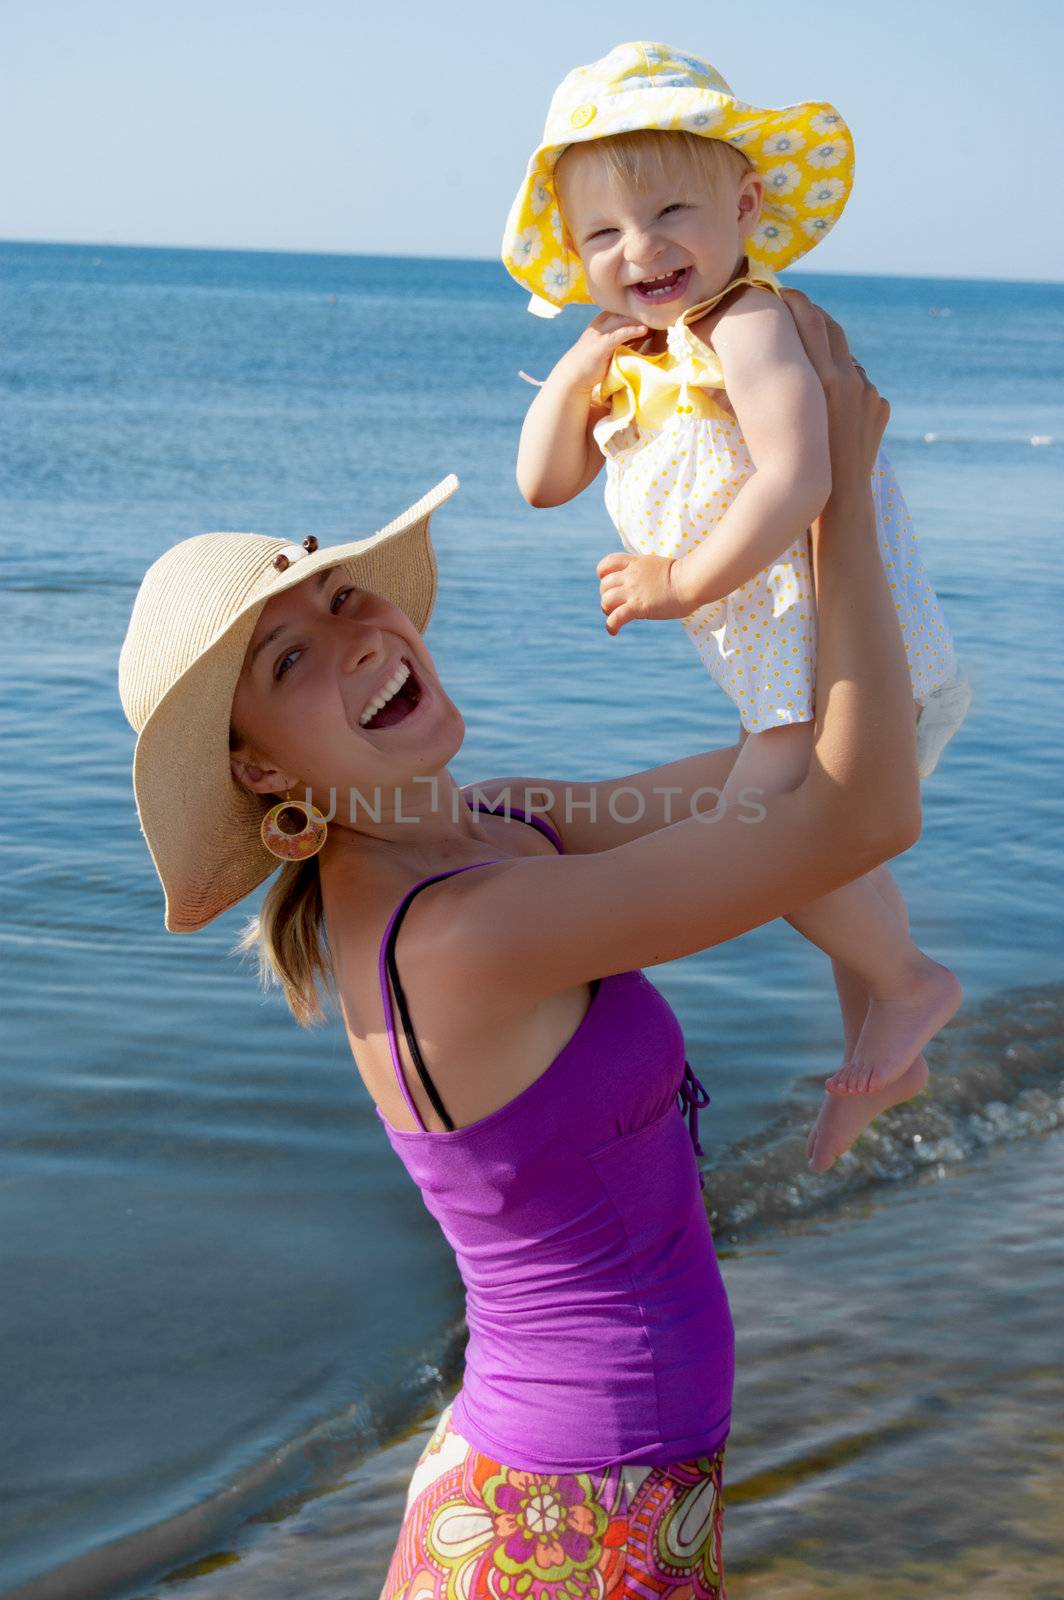 Joyful mother and daughter at beach in summer